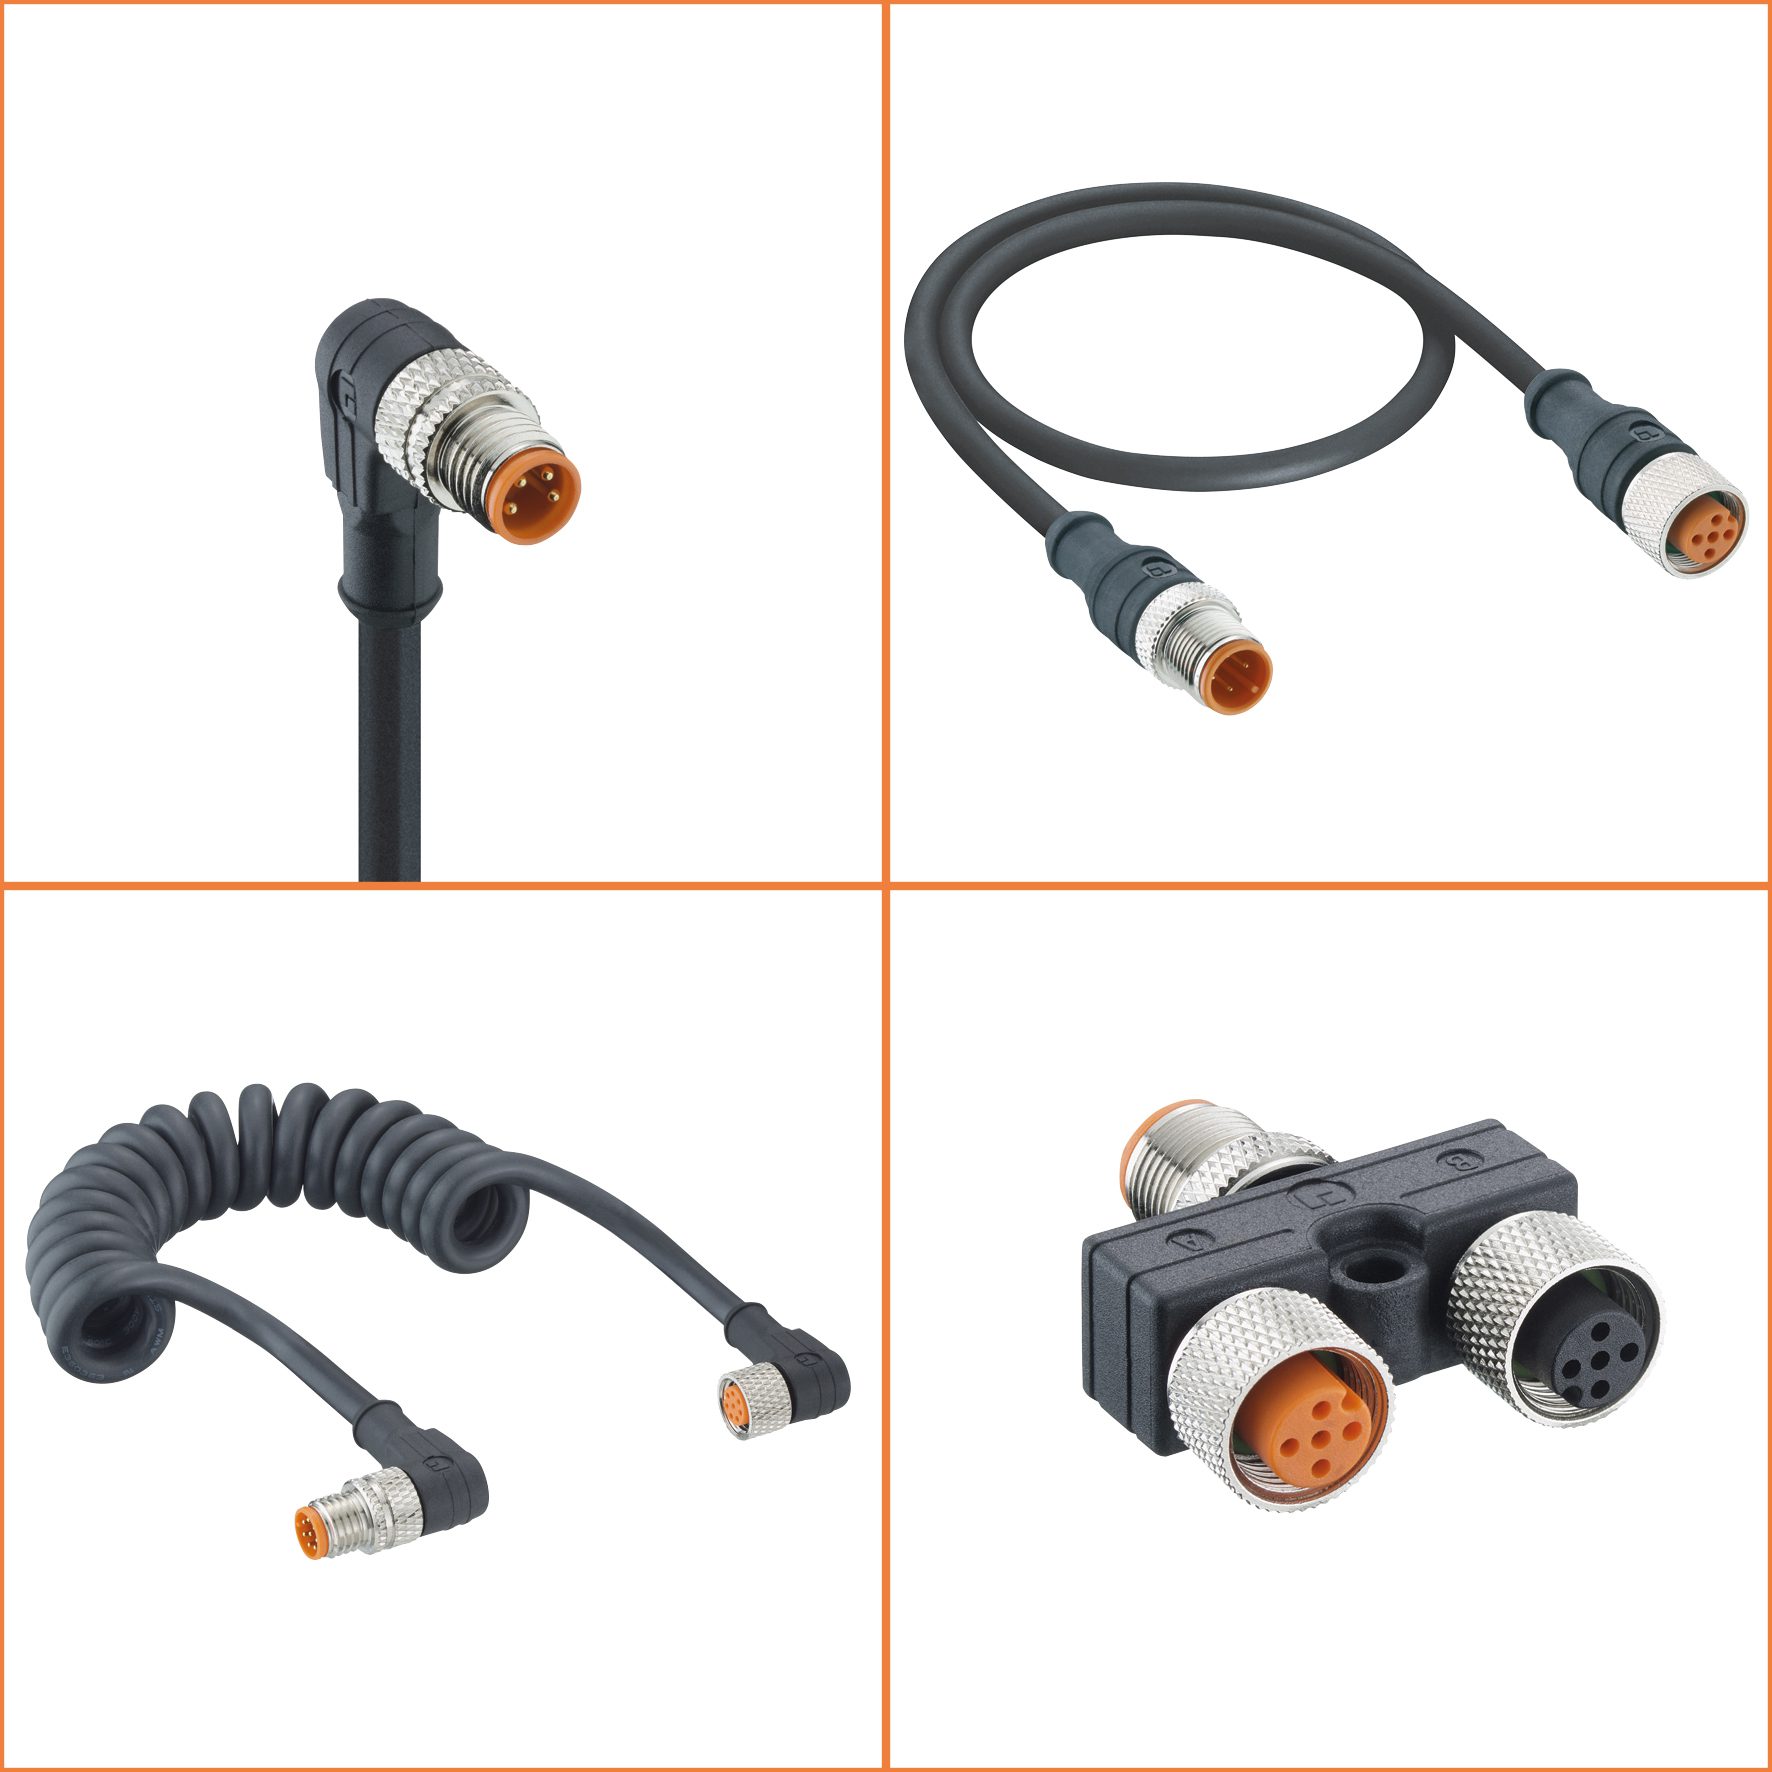 Lutronic is significantly expanding its product range of cordsets